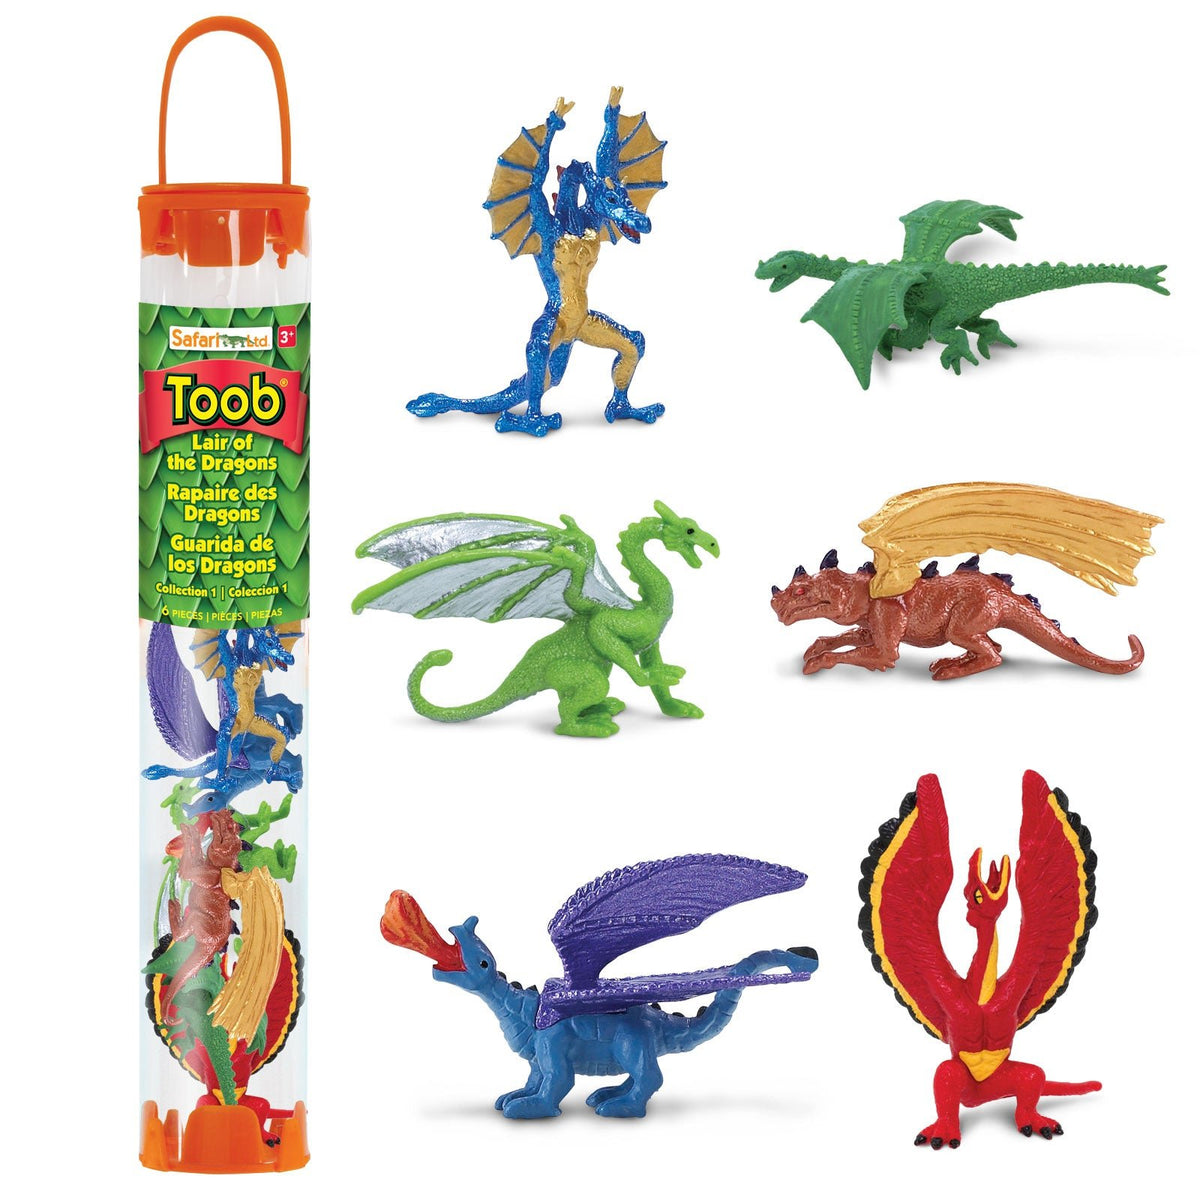 Let's Take A Look At Playmobil's New Dragons Playsets